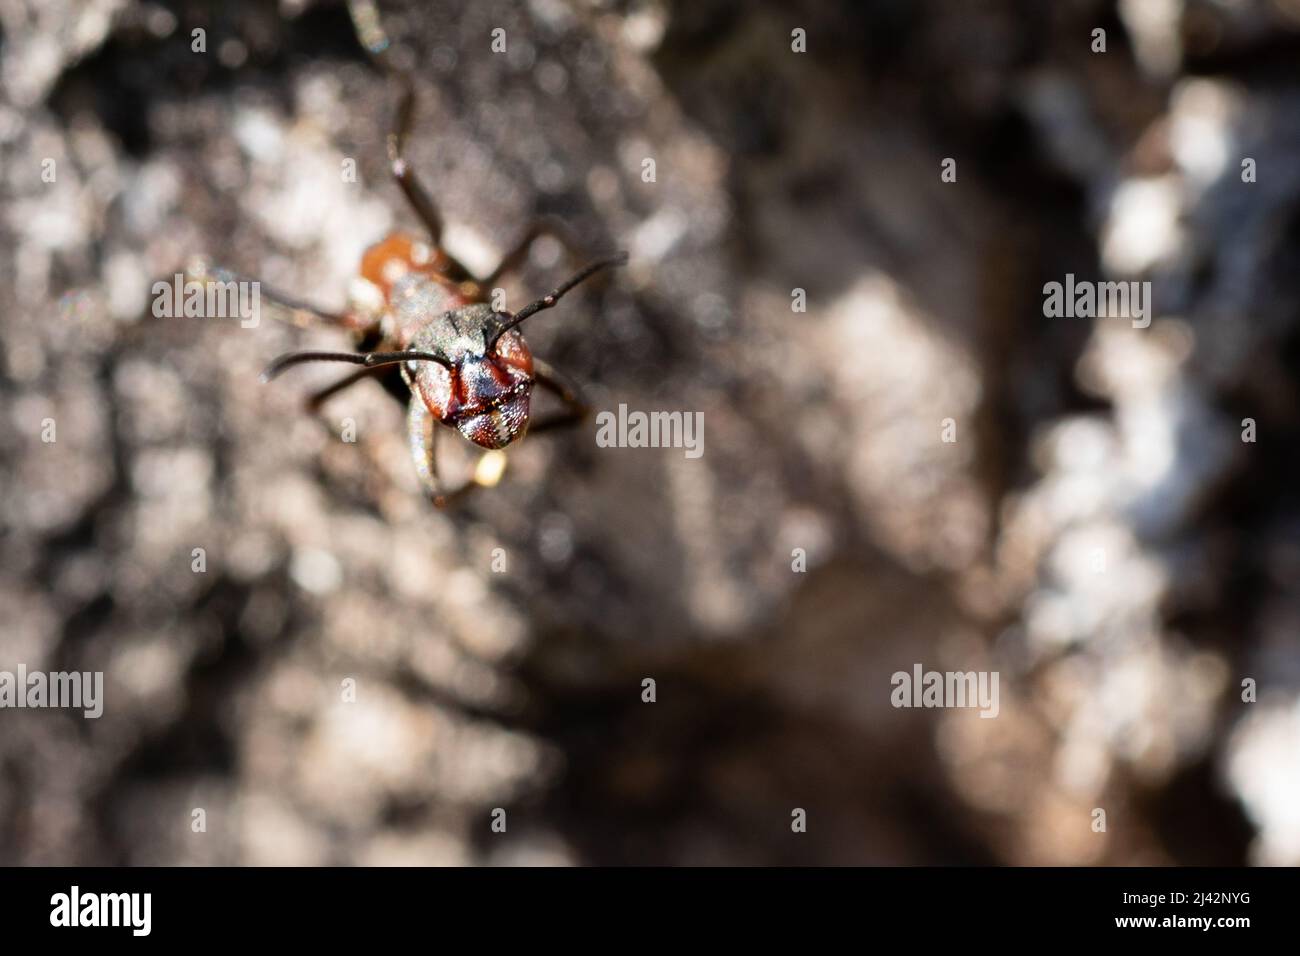 Red wood ant standing on its hind legs in a defensive position, ready to strike Stock Photo